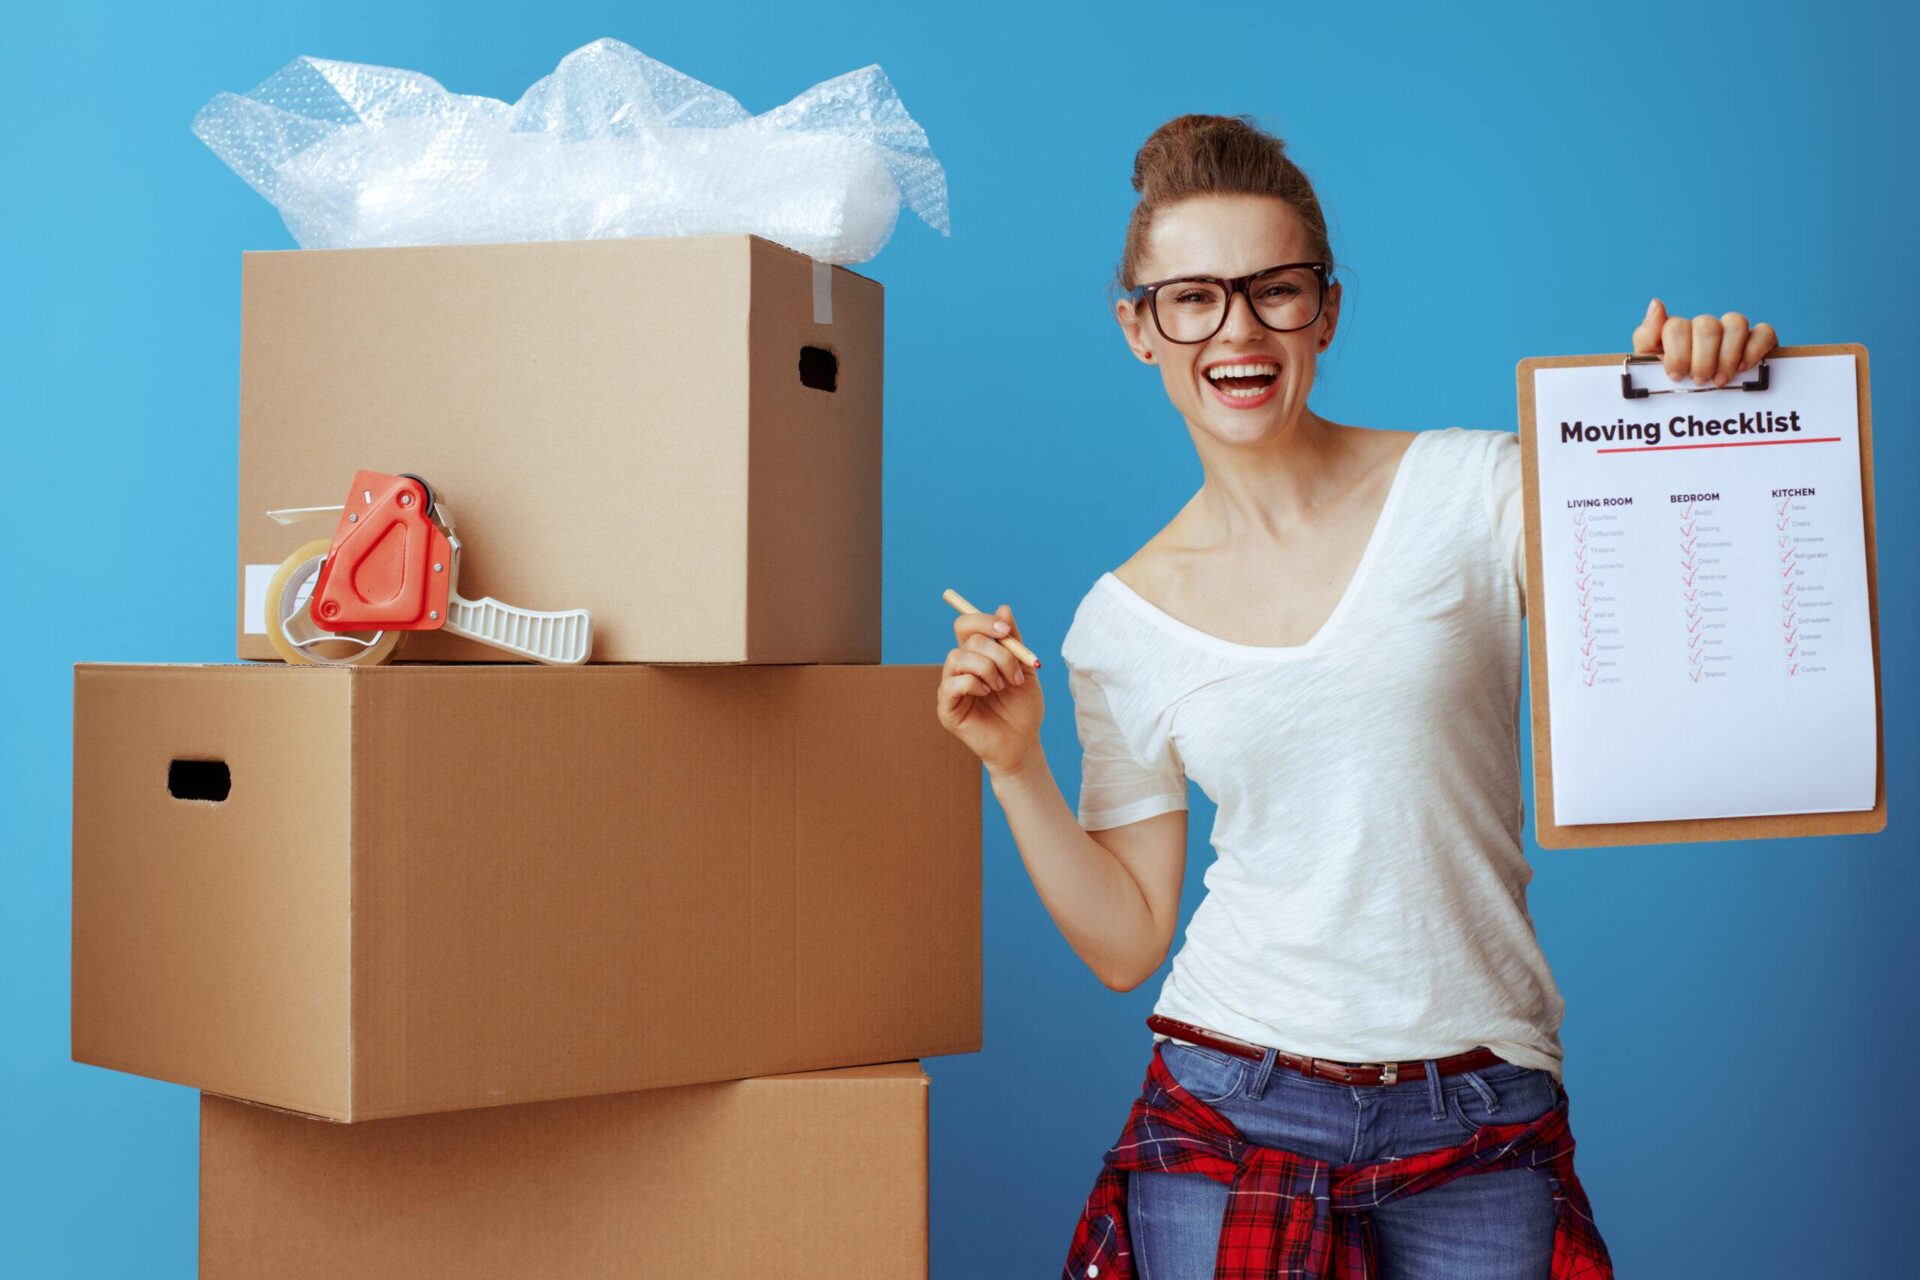 Top 10 Moving Tips For Moving Day